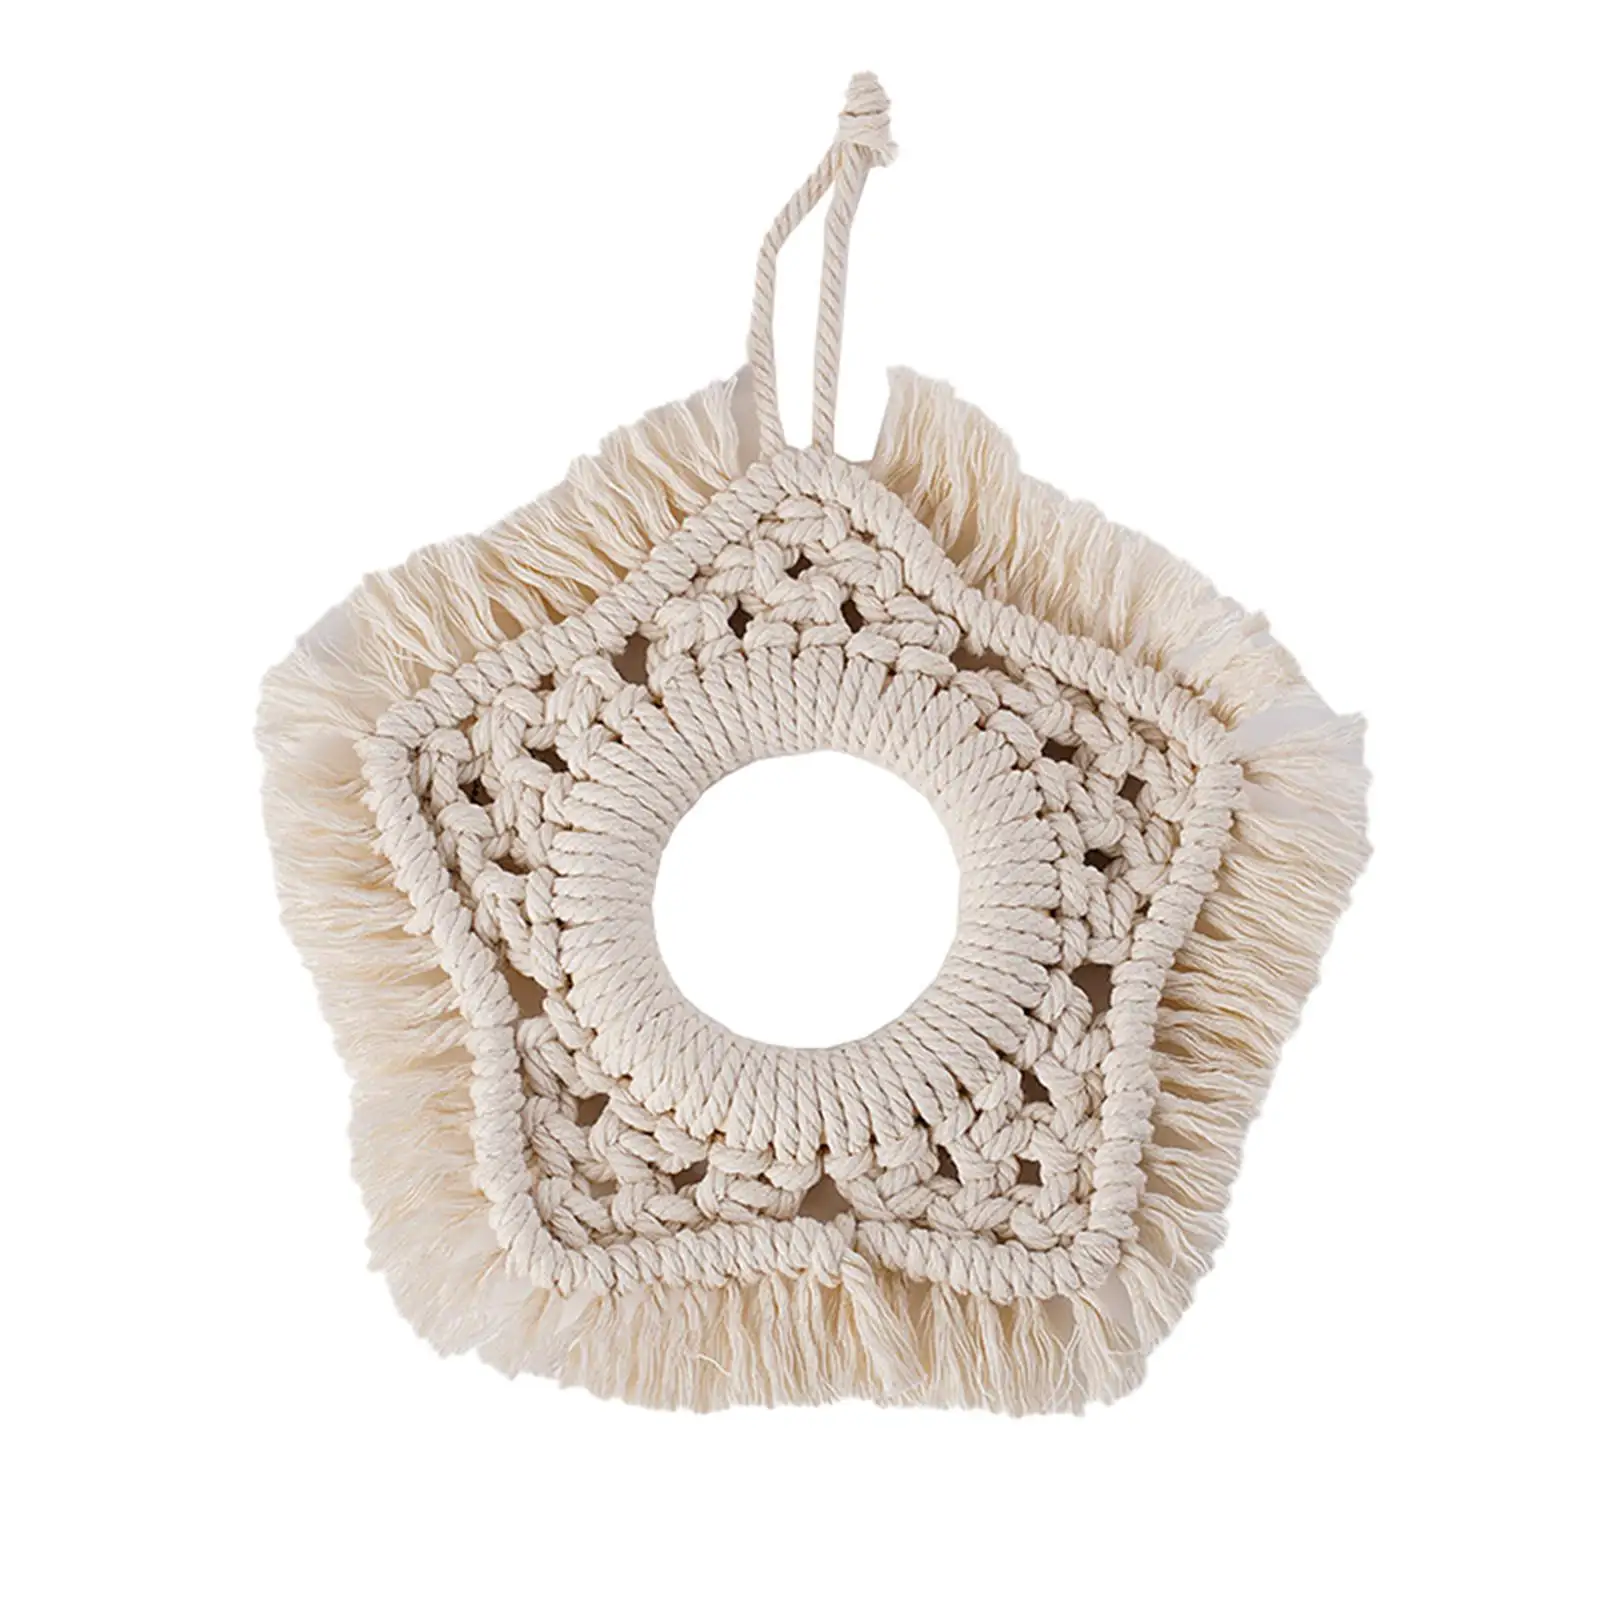 Chic Macrame Woven Wall Hanging Bohemian Crafts Pendant for Dorm Bedroom Wedding Decoration